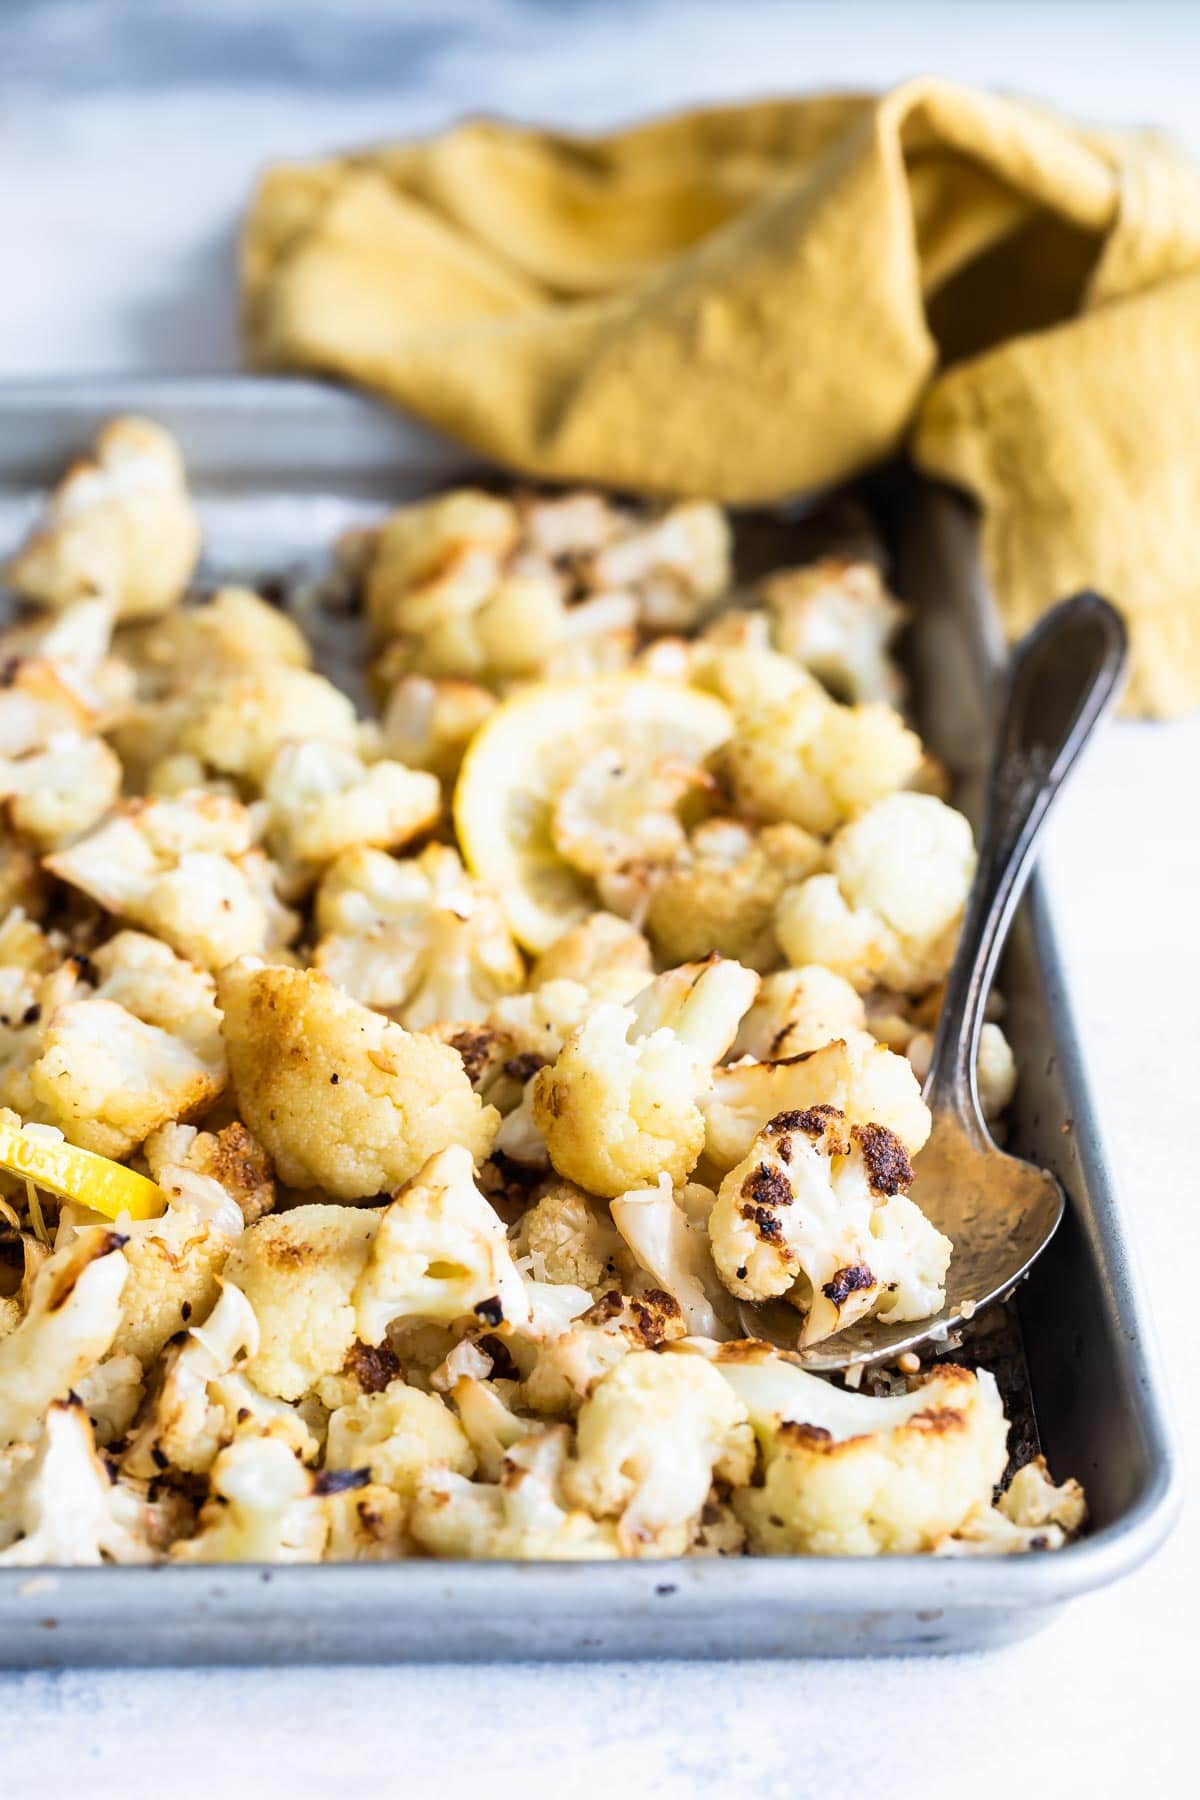 Roasted cauliflower on a baking sheet with a spoon resting in it.